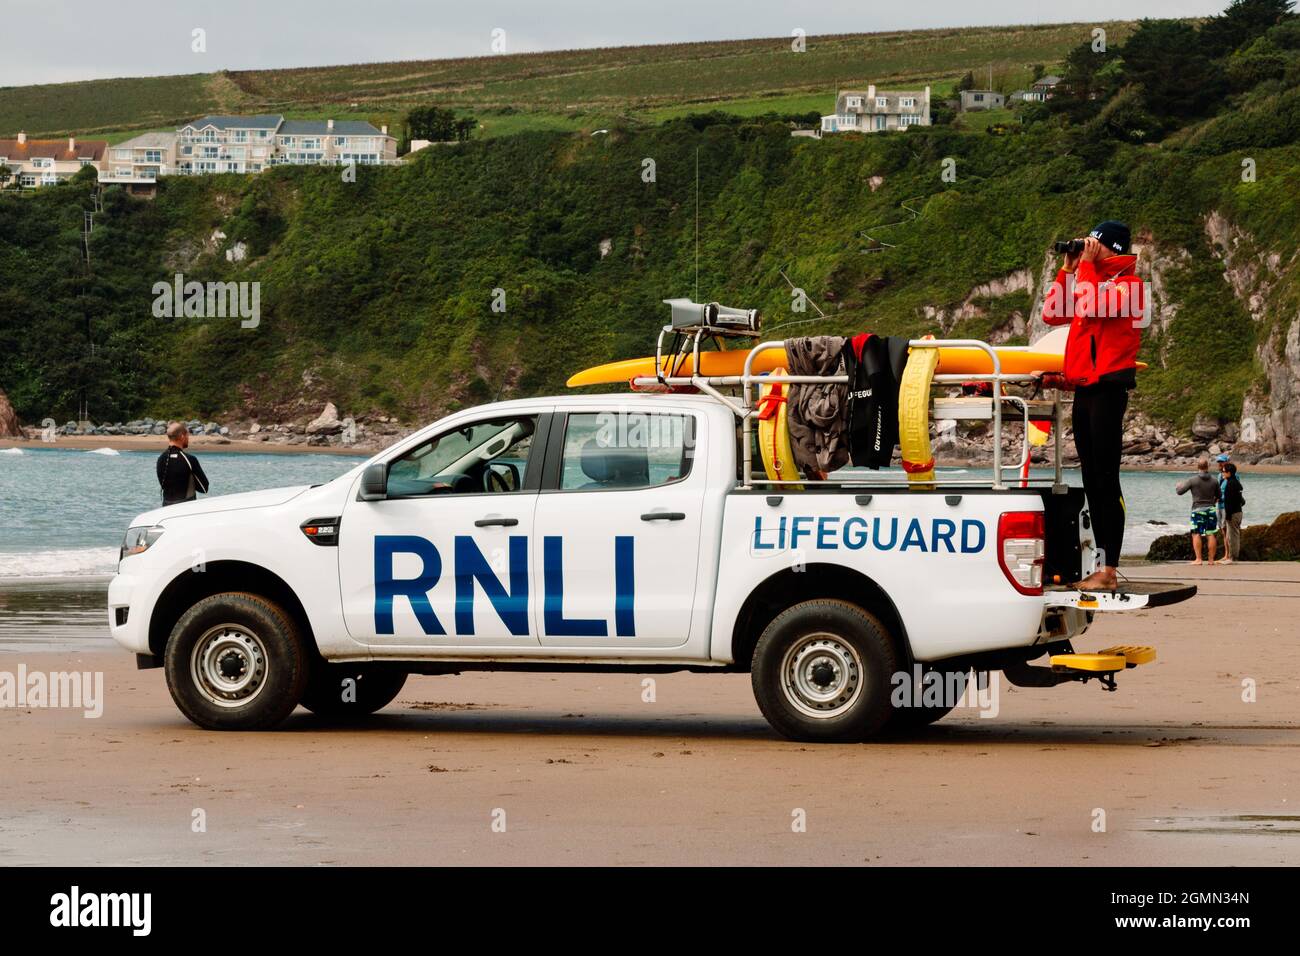 A lifeguard watches the swimmers through binoculars from a RNLI patrol vehicle parked on Bantham Beach, Devon. Stock Photo